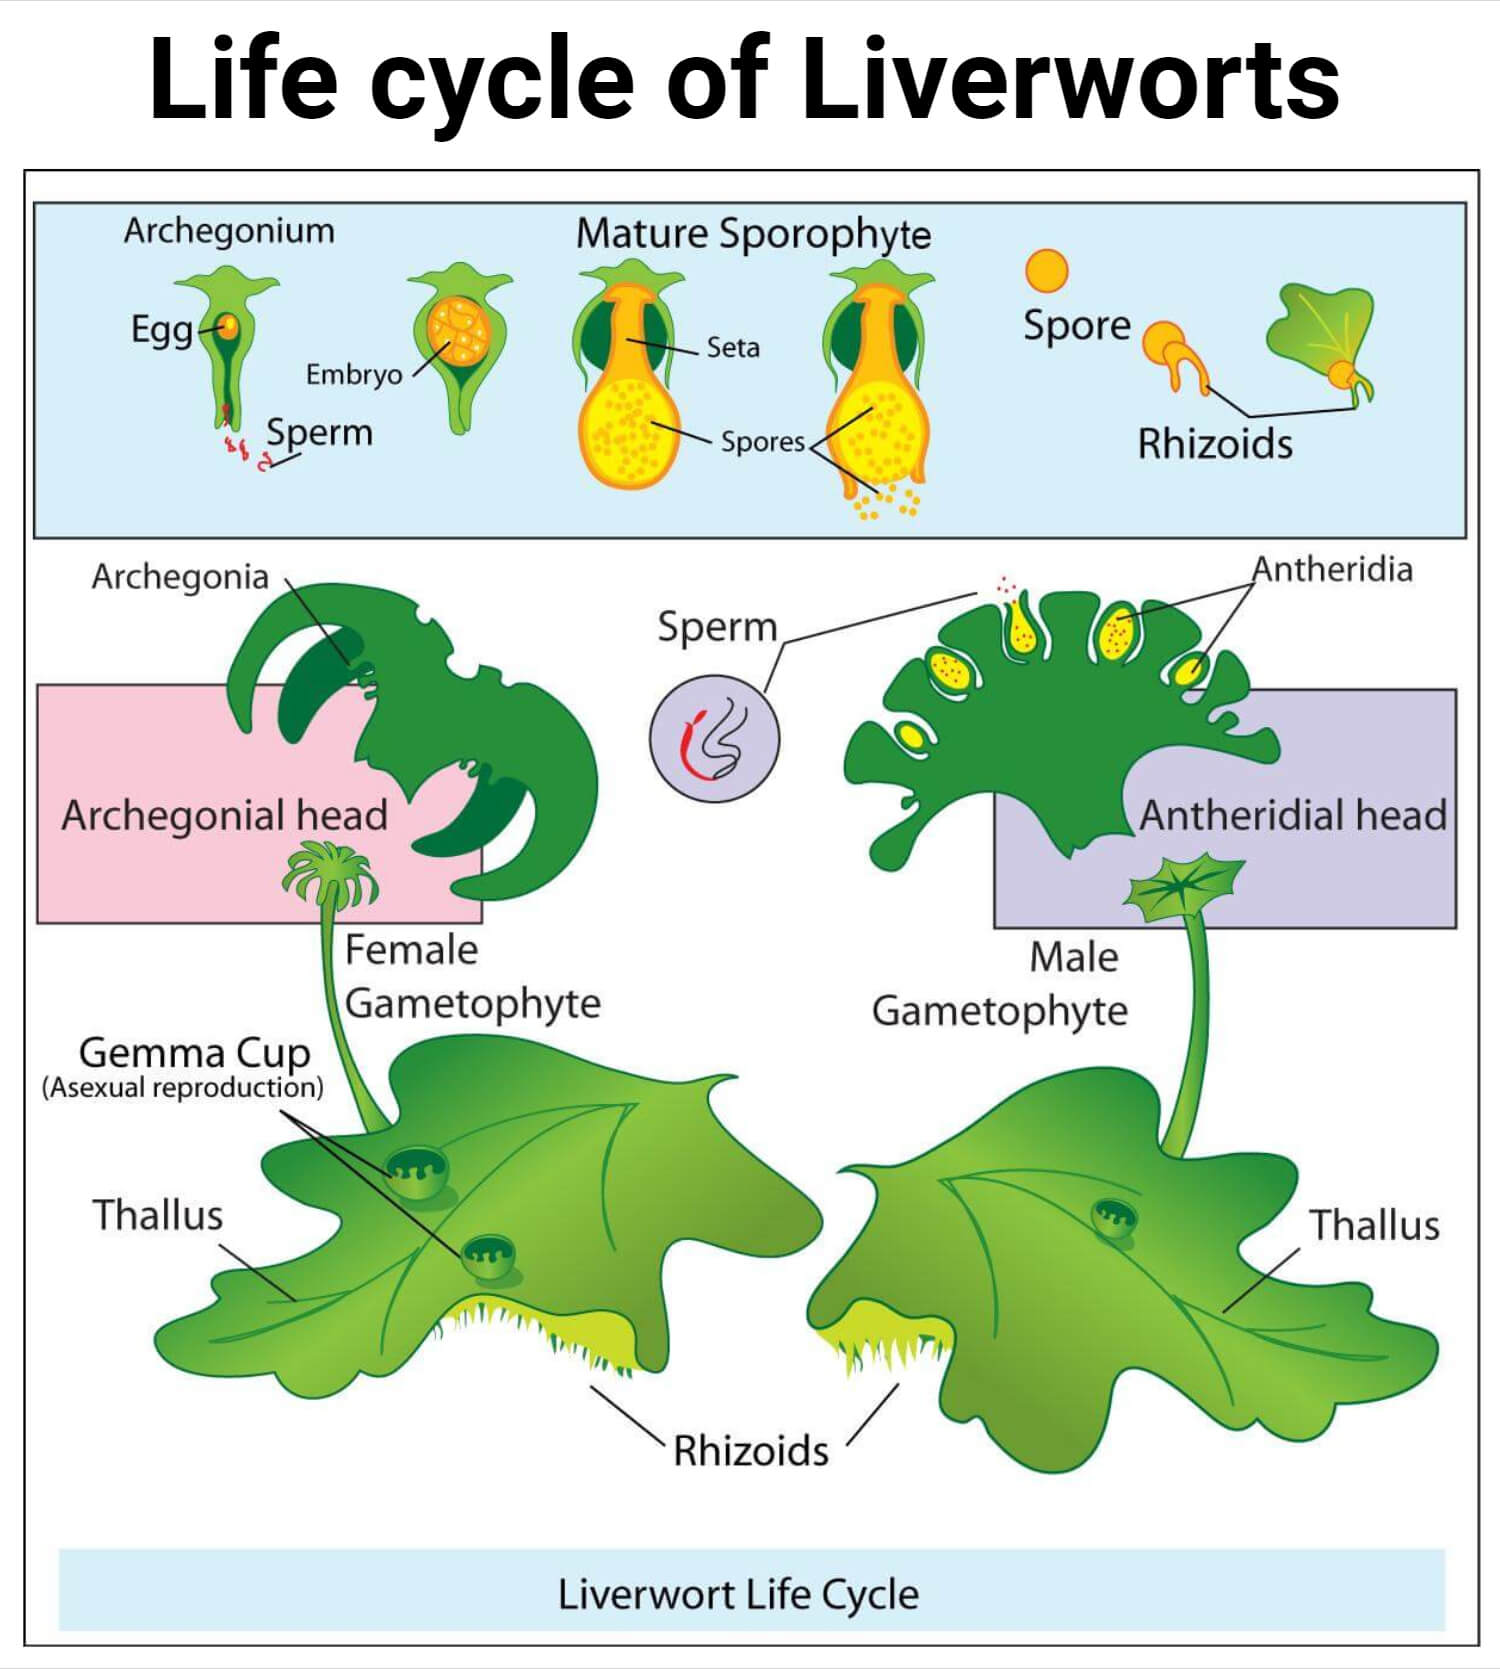 Life cycle of Liverworts